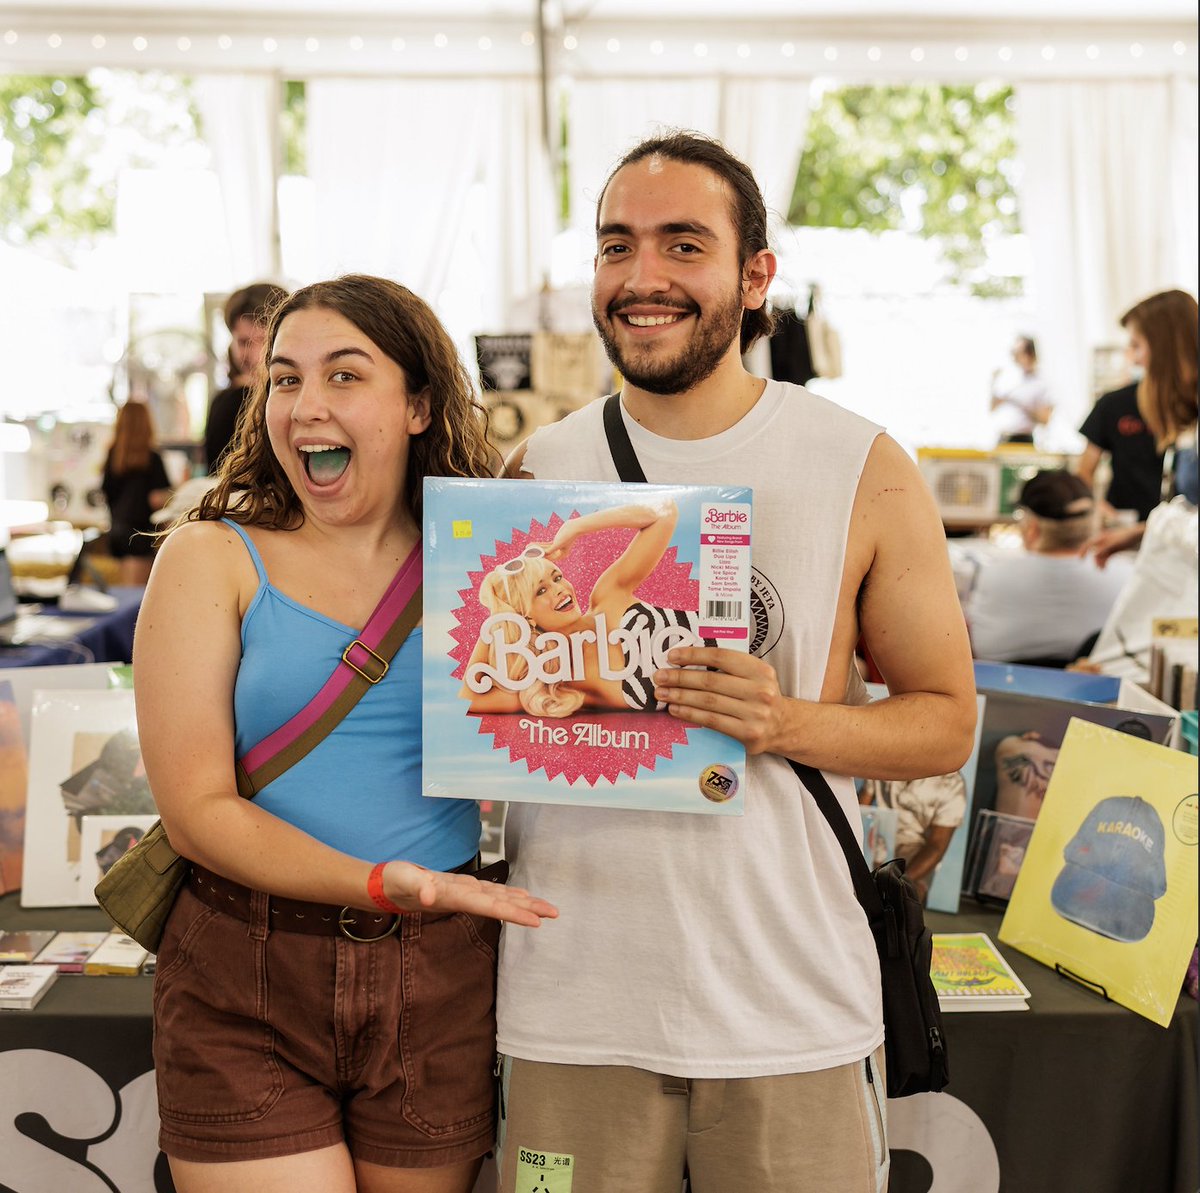 Happy Record Store Day! If you want to get your record label, merch, publication, or other music biz in front of fans at #P4kFest, The CHIRP Record Fair, has vendor openings. 

Find details and reserve your spot here: p4k.in/3xsHCIs